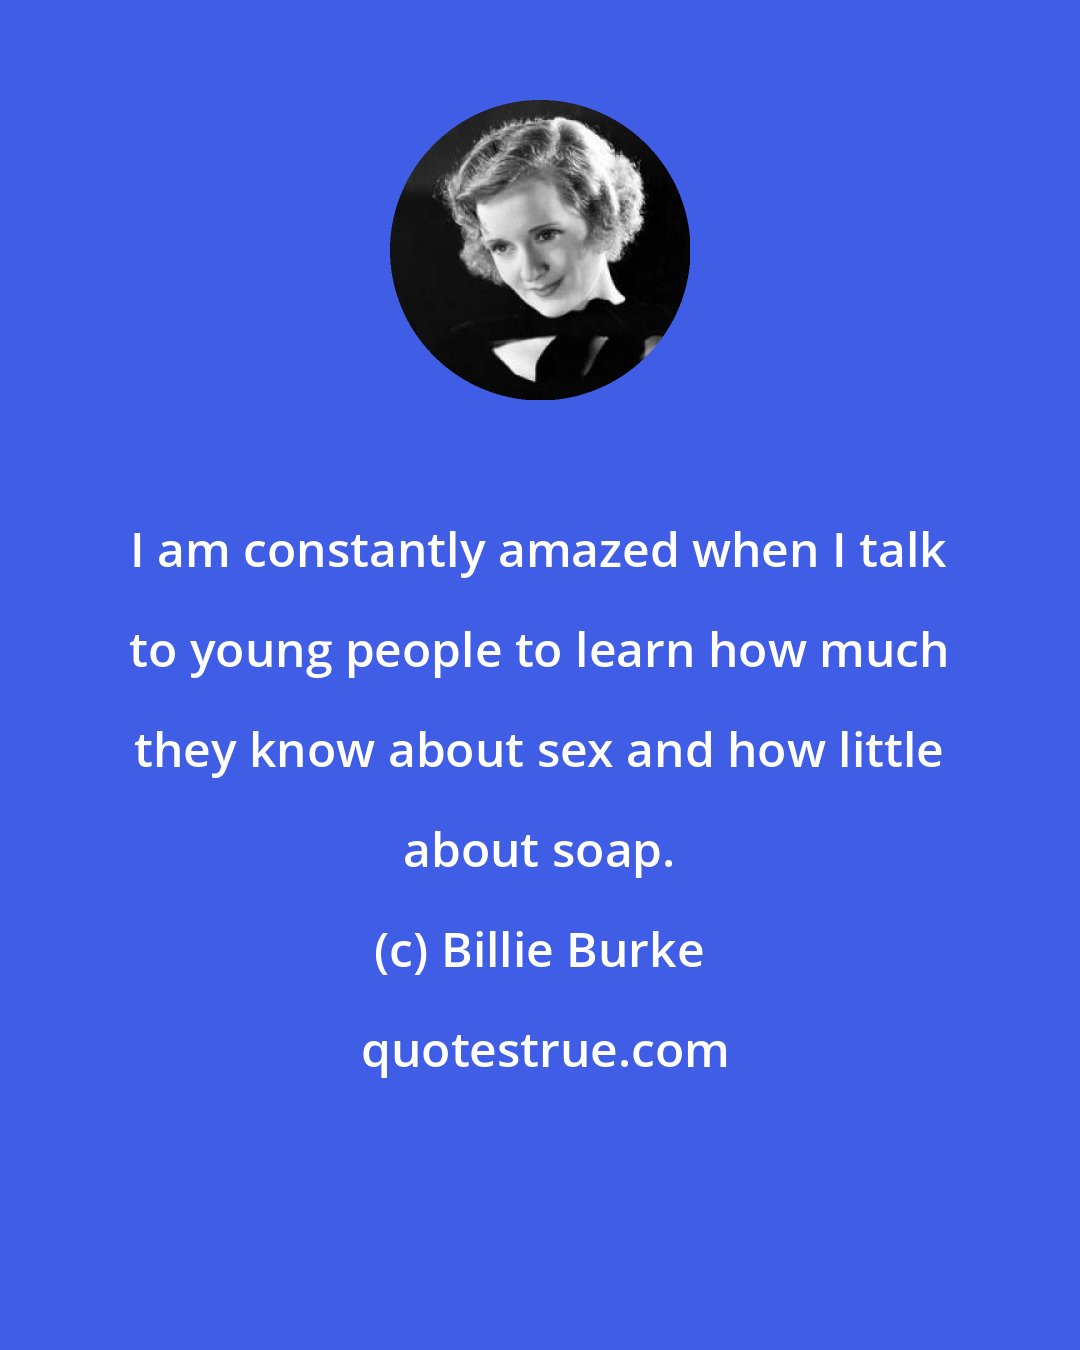 Billie Burke: I am constantly amazed when I talk to young people to learn how much they know about sex and how little about soap.